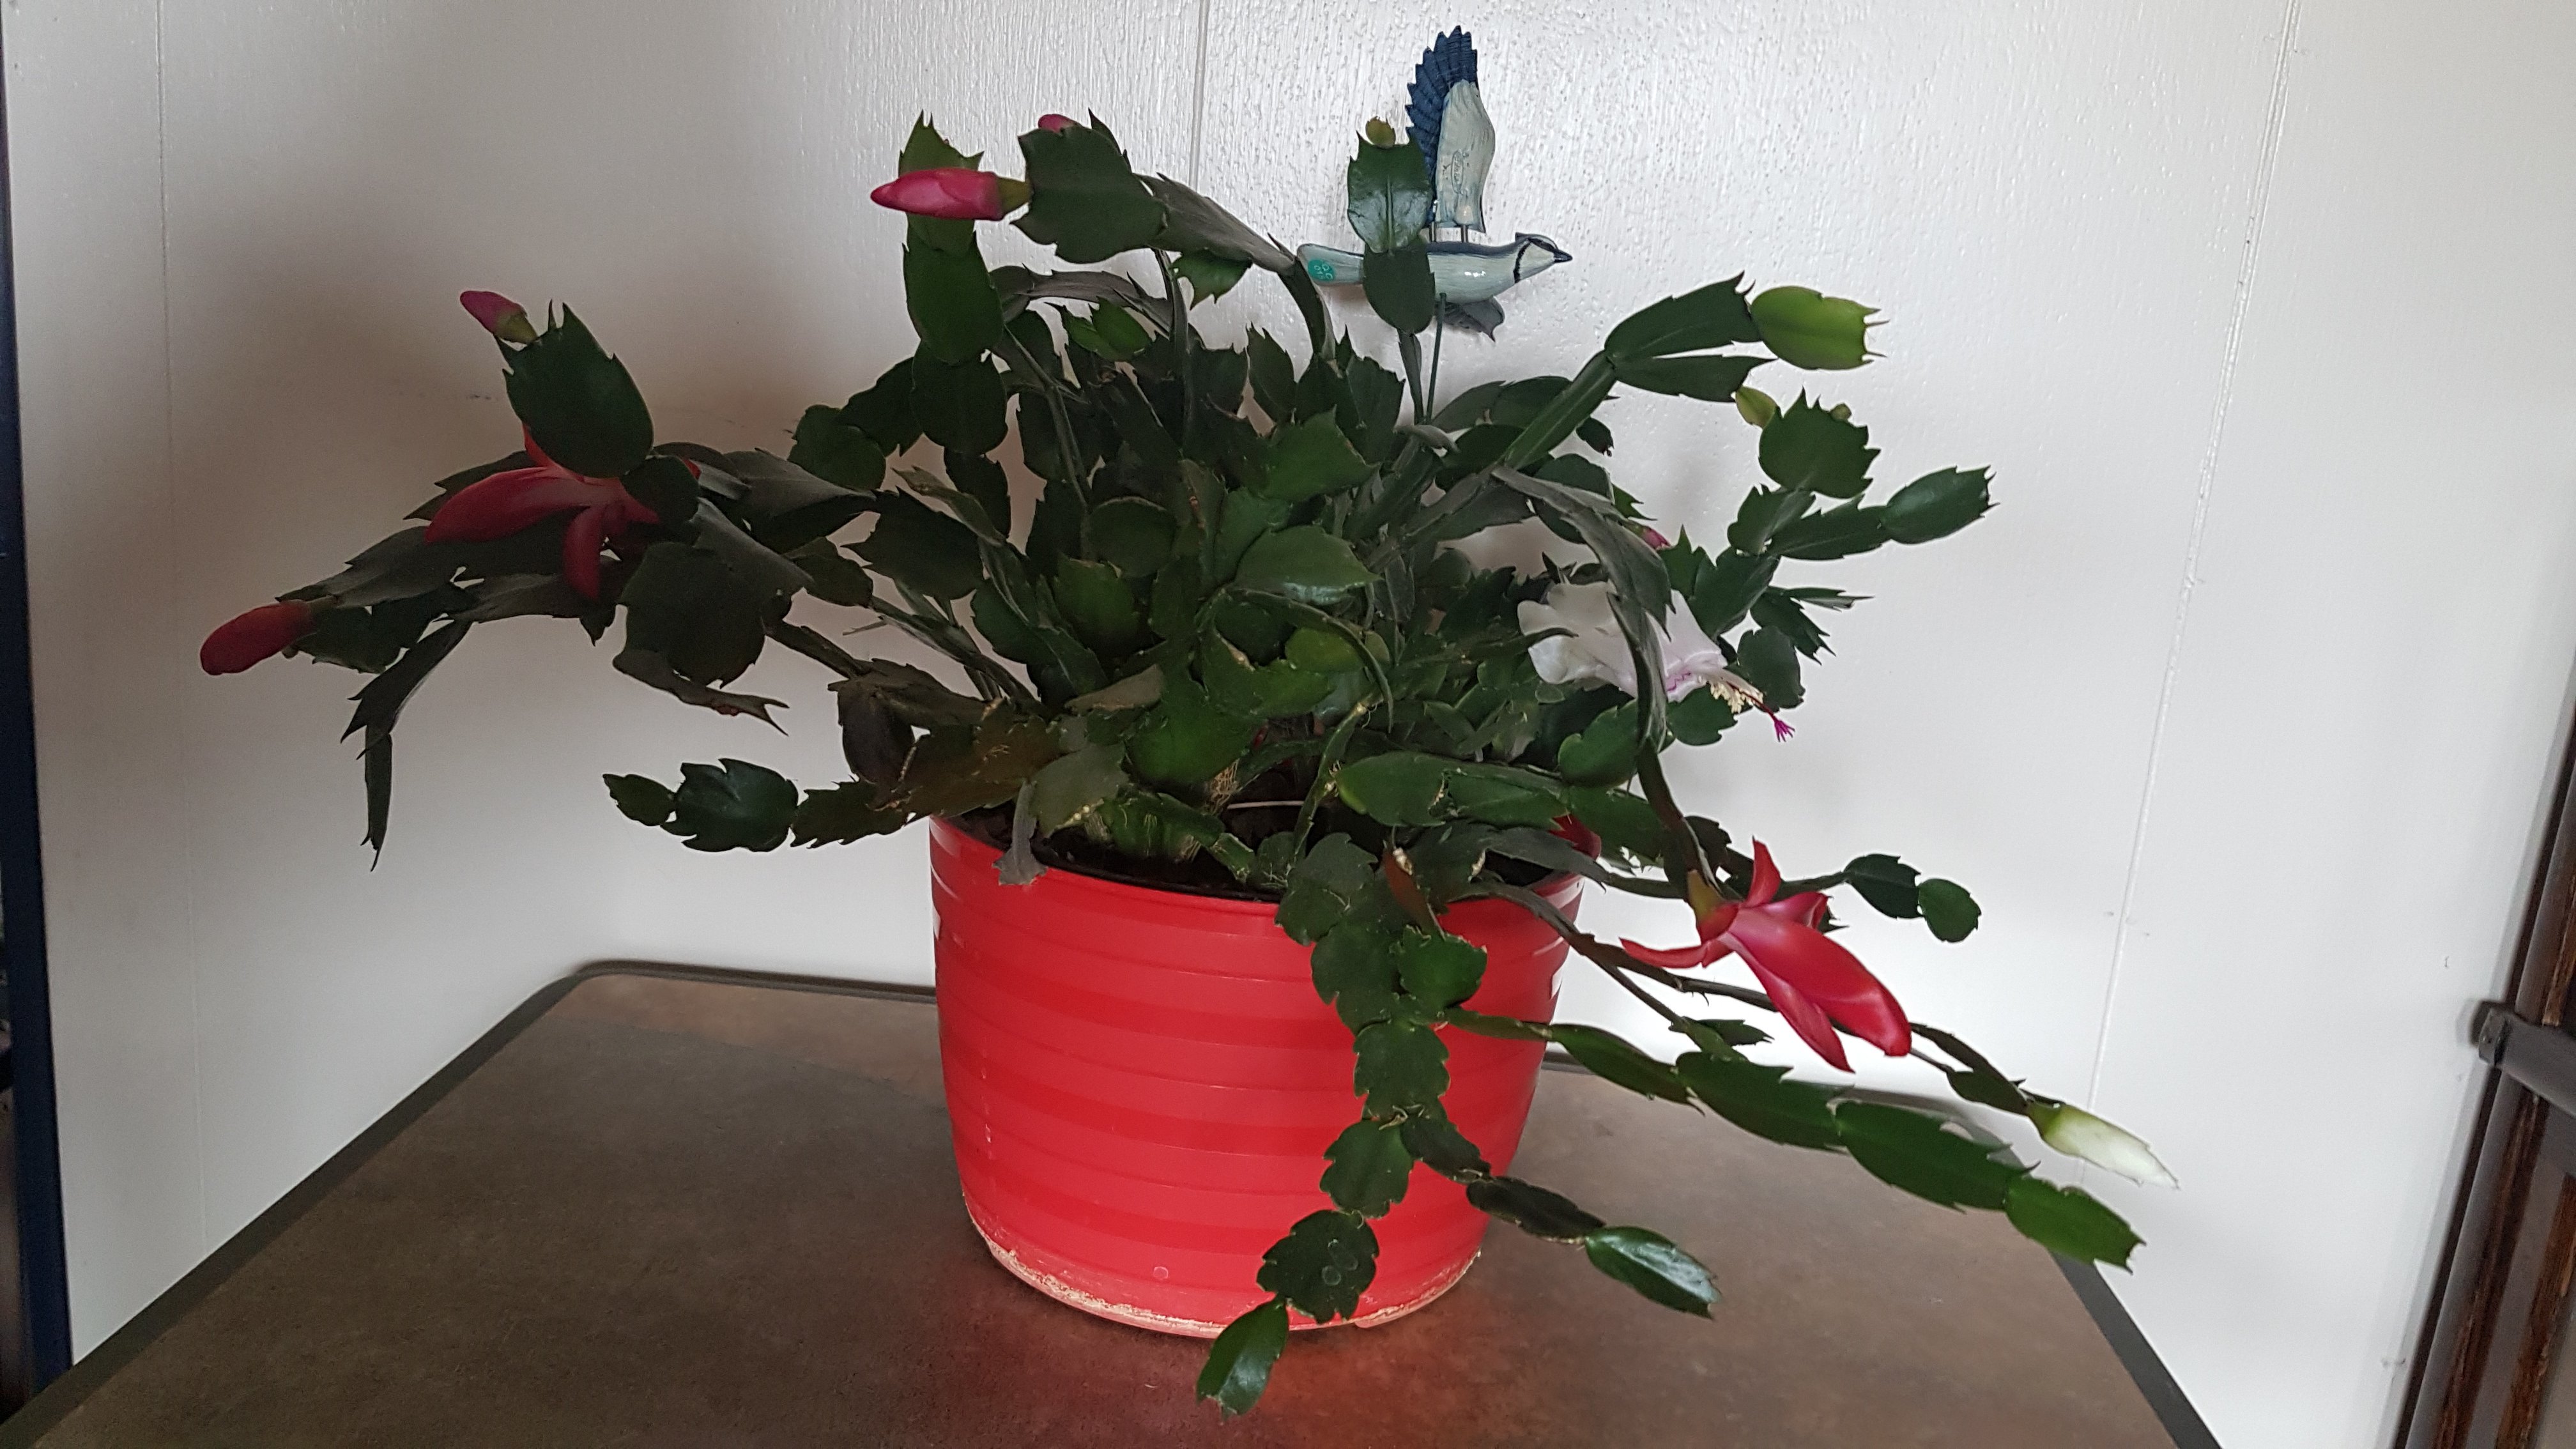 Easter Cactus.  It is red on one side and white on the other side.  Blooms are almost ready.  Easter came a little early this year.